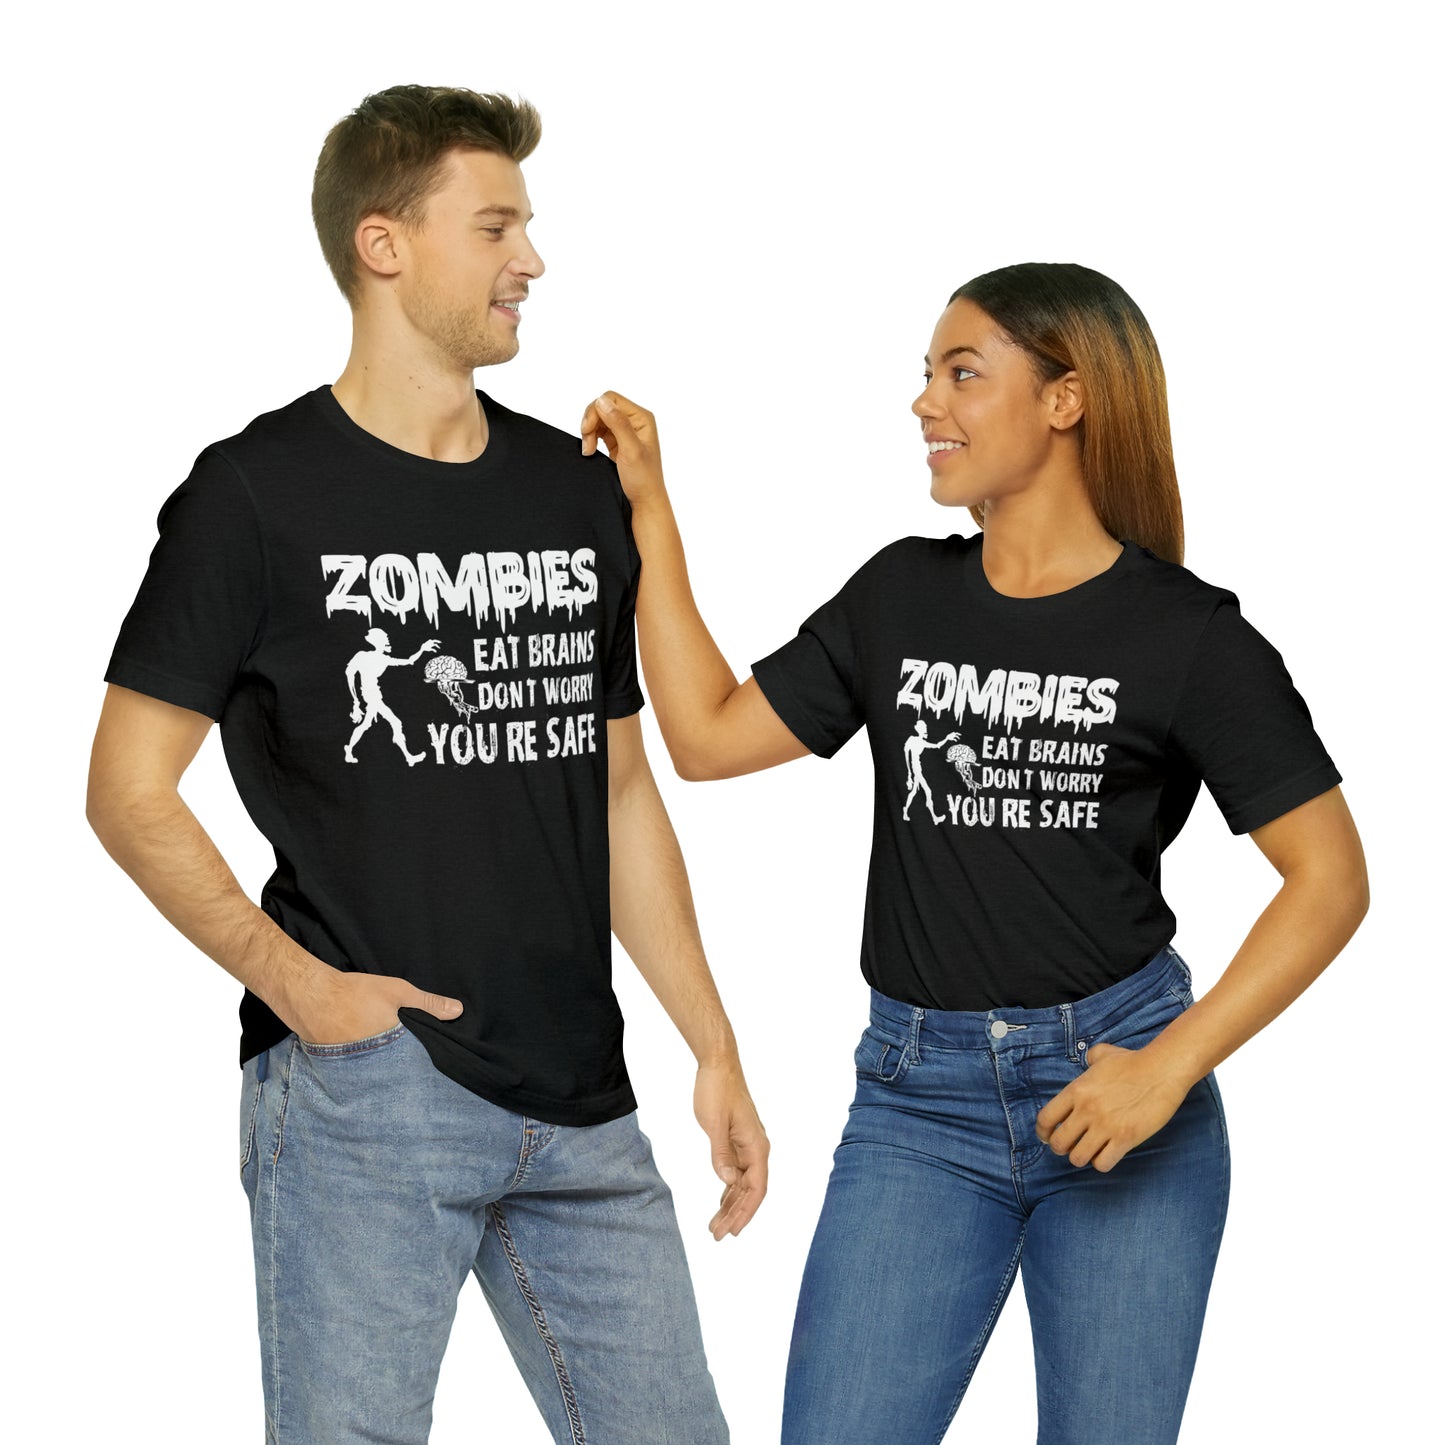 Don't Worry Zombies Eat Brains Tee